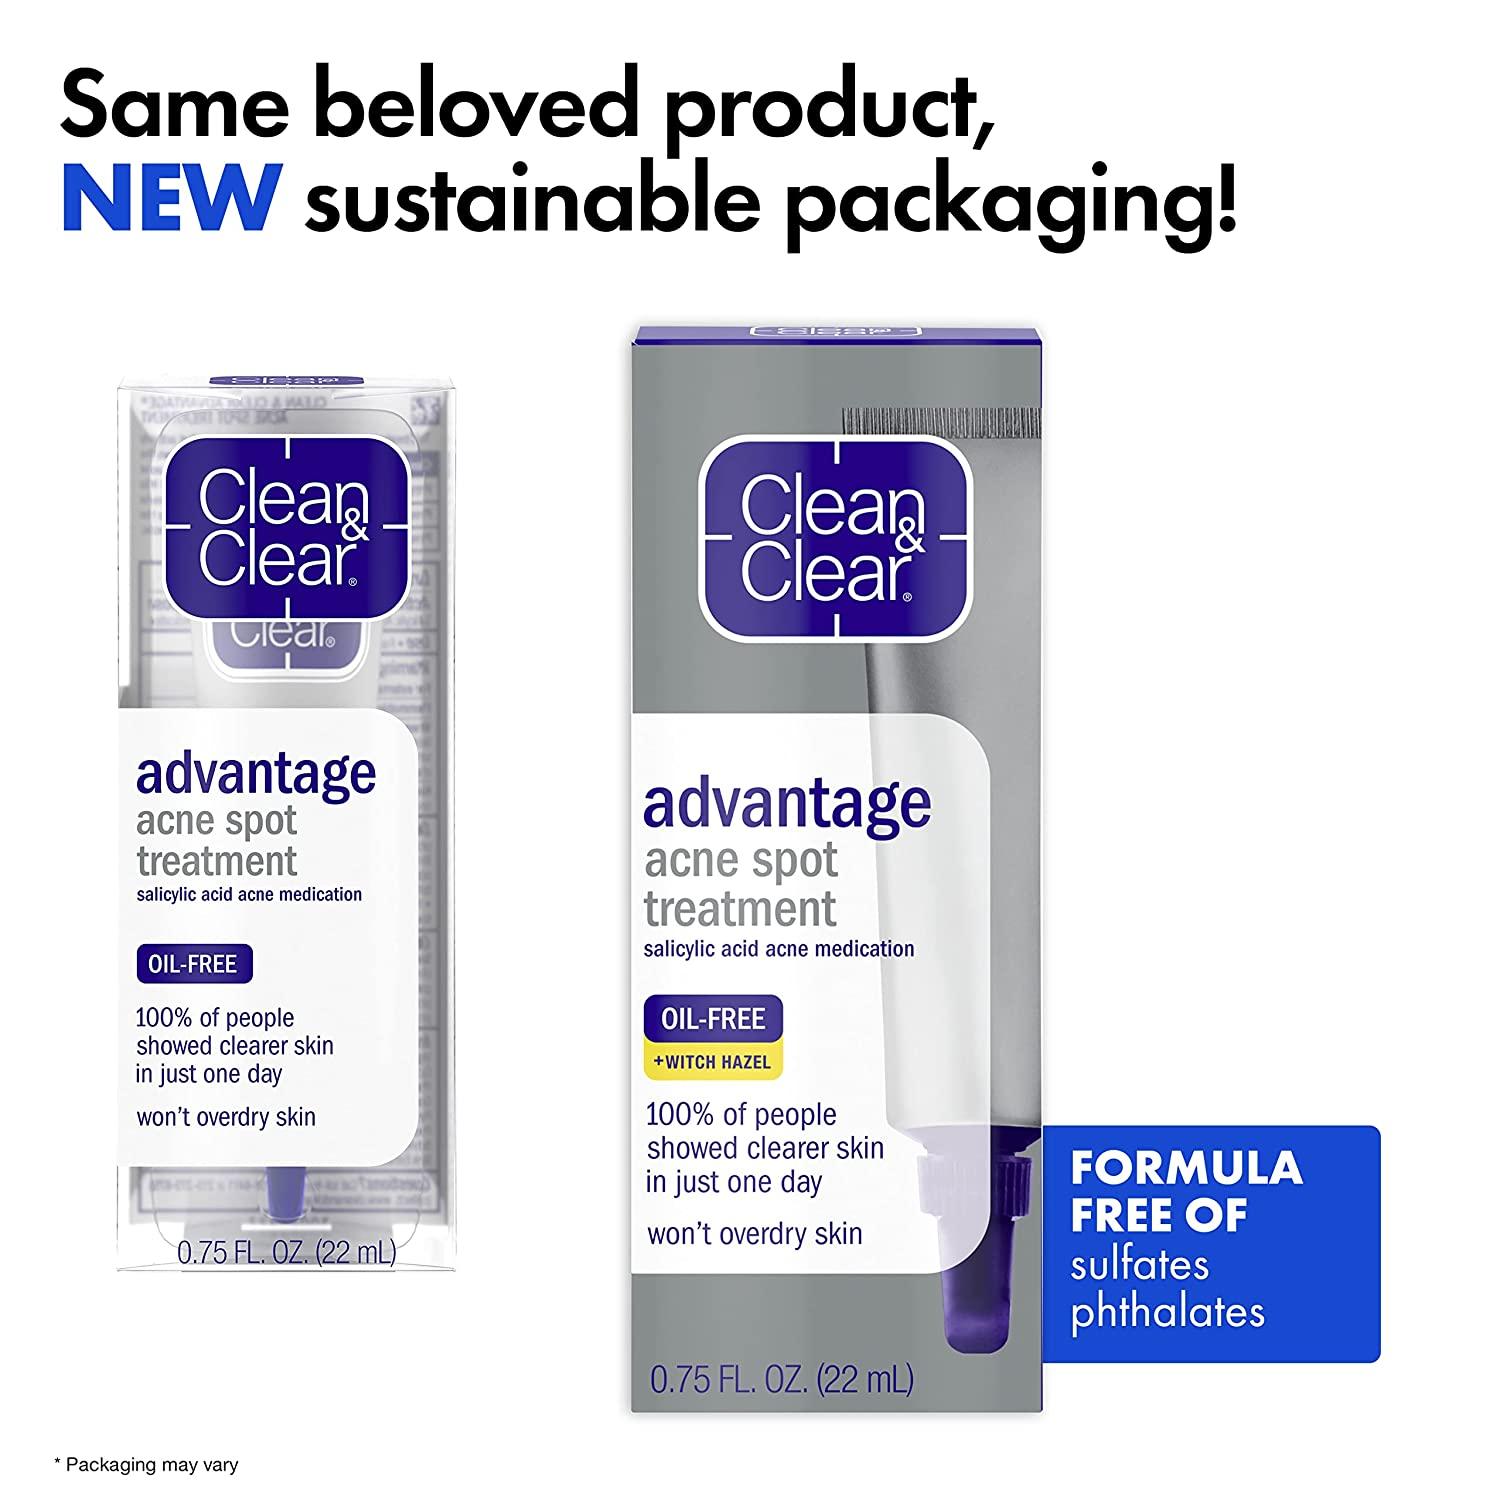 Clean & Clear® Arabia, Acne Treatment Products